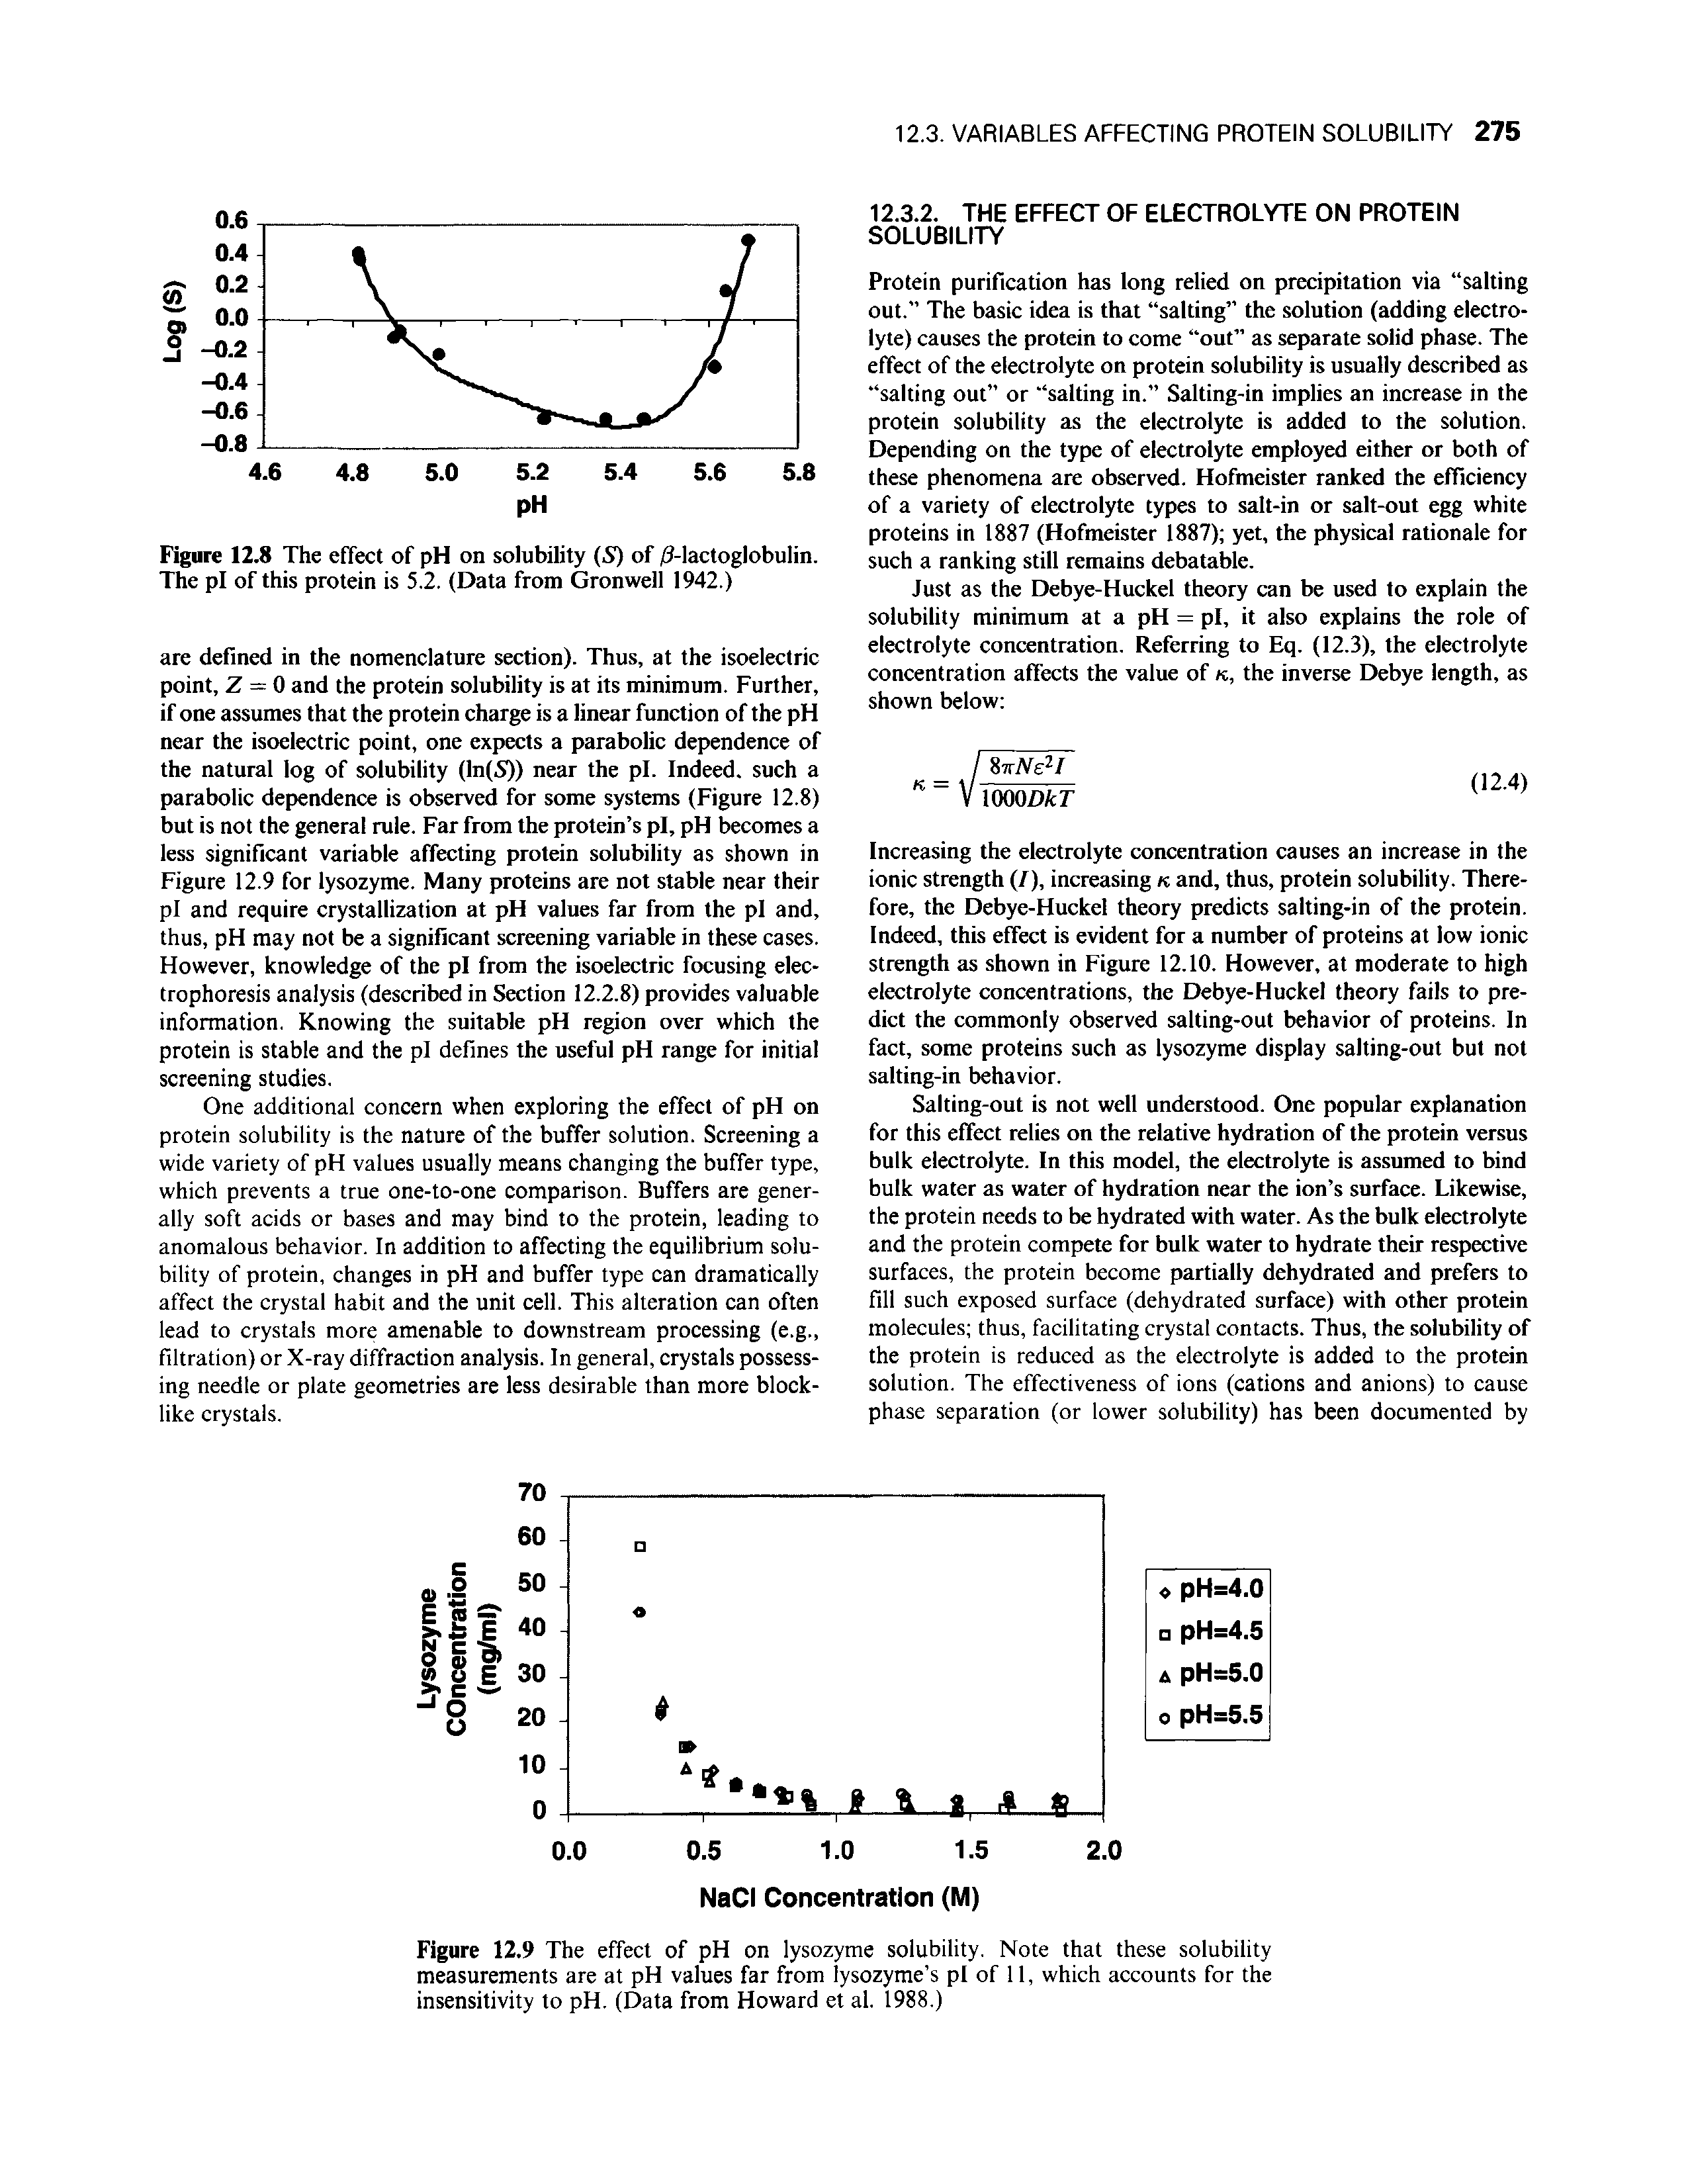 Figure 12.8 The effect of pH on solubility (S) of 3-lactoglobulin. The pi of this protein is 5.2. (Data from Gronwell 1942.)...